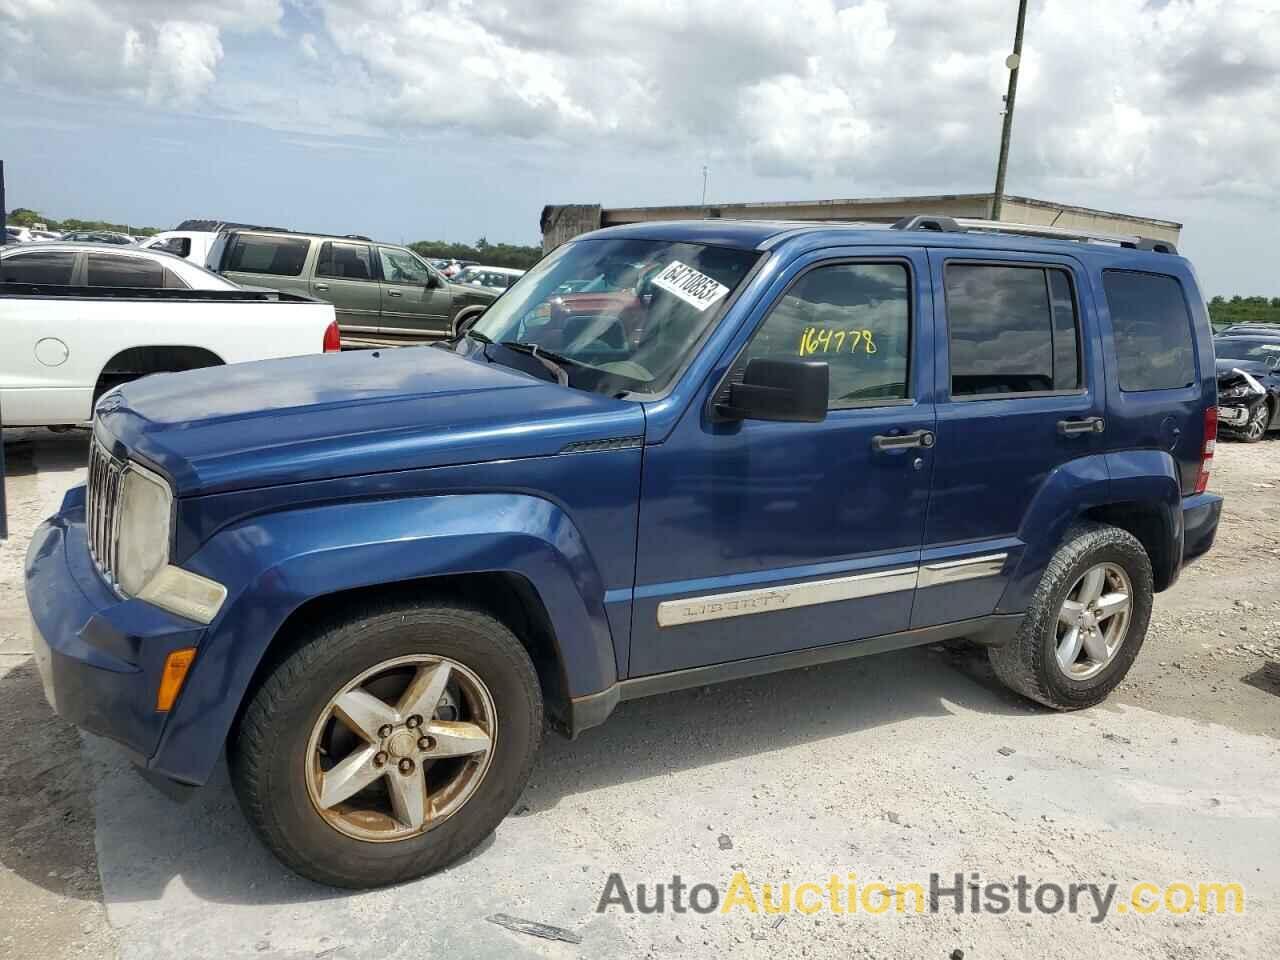 2010 JEEP LIBERTY LIMITED, 1J4PP5GK5AW138303